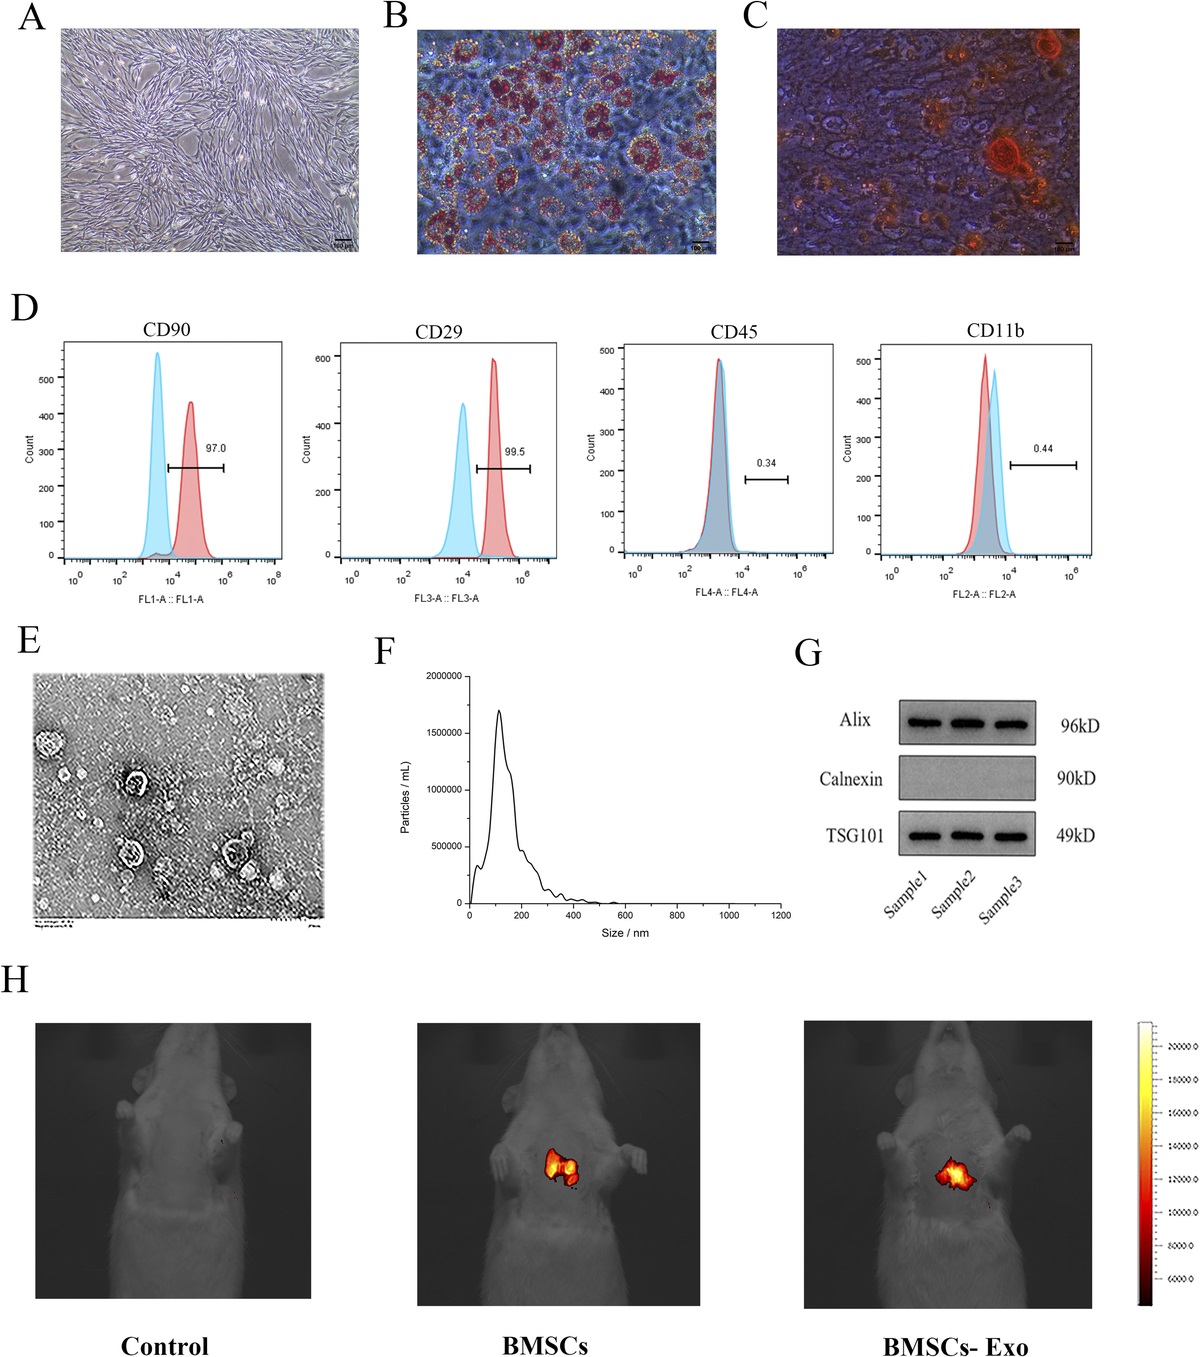 EFFECT OF EXOSOMES DERIVED FROM BONE MARROW MESENCHYMAL STEM CELLS ON PROGRAMMED CELL DEATH IN BLAST-INDUCED LUNG INJURY IN RATS